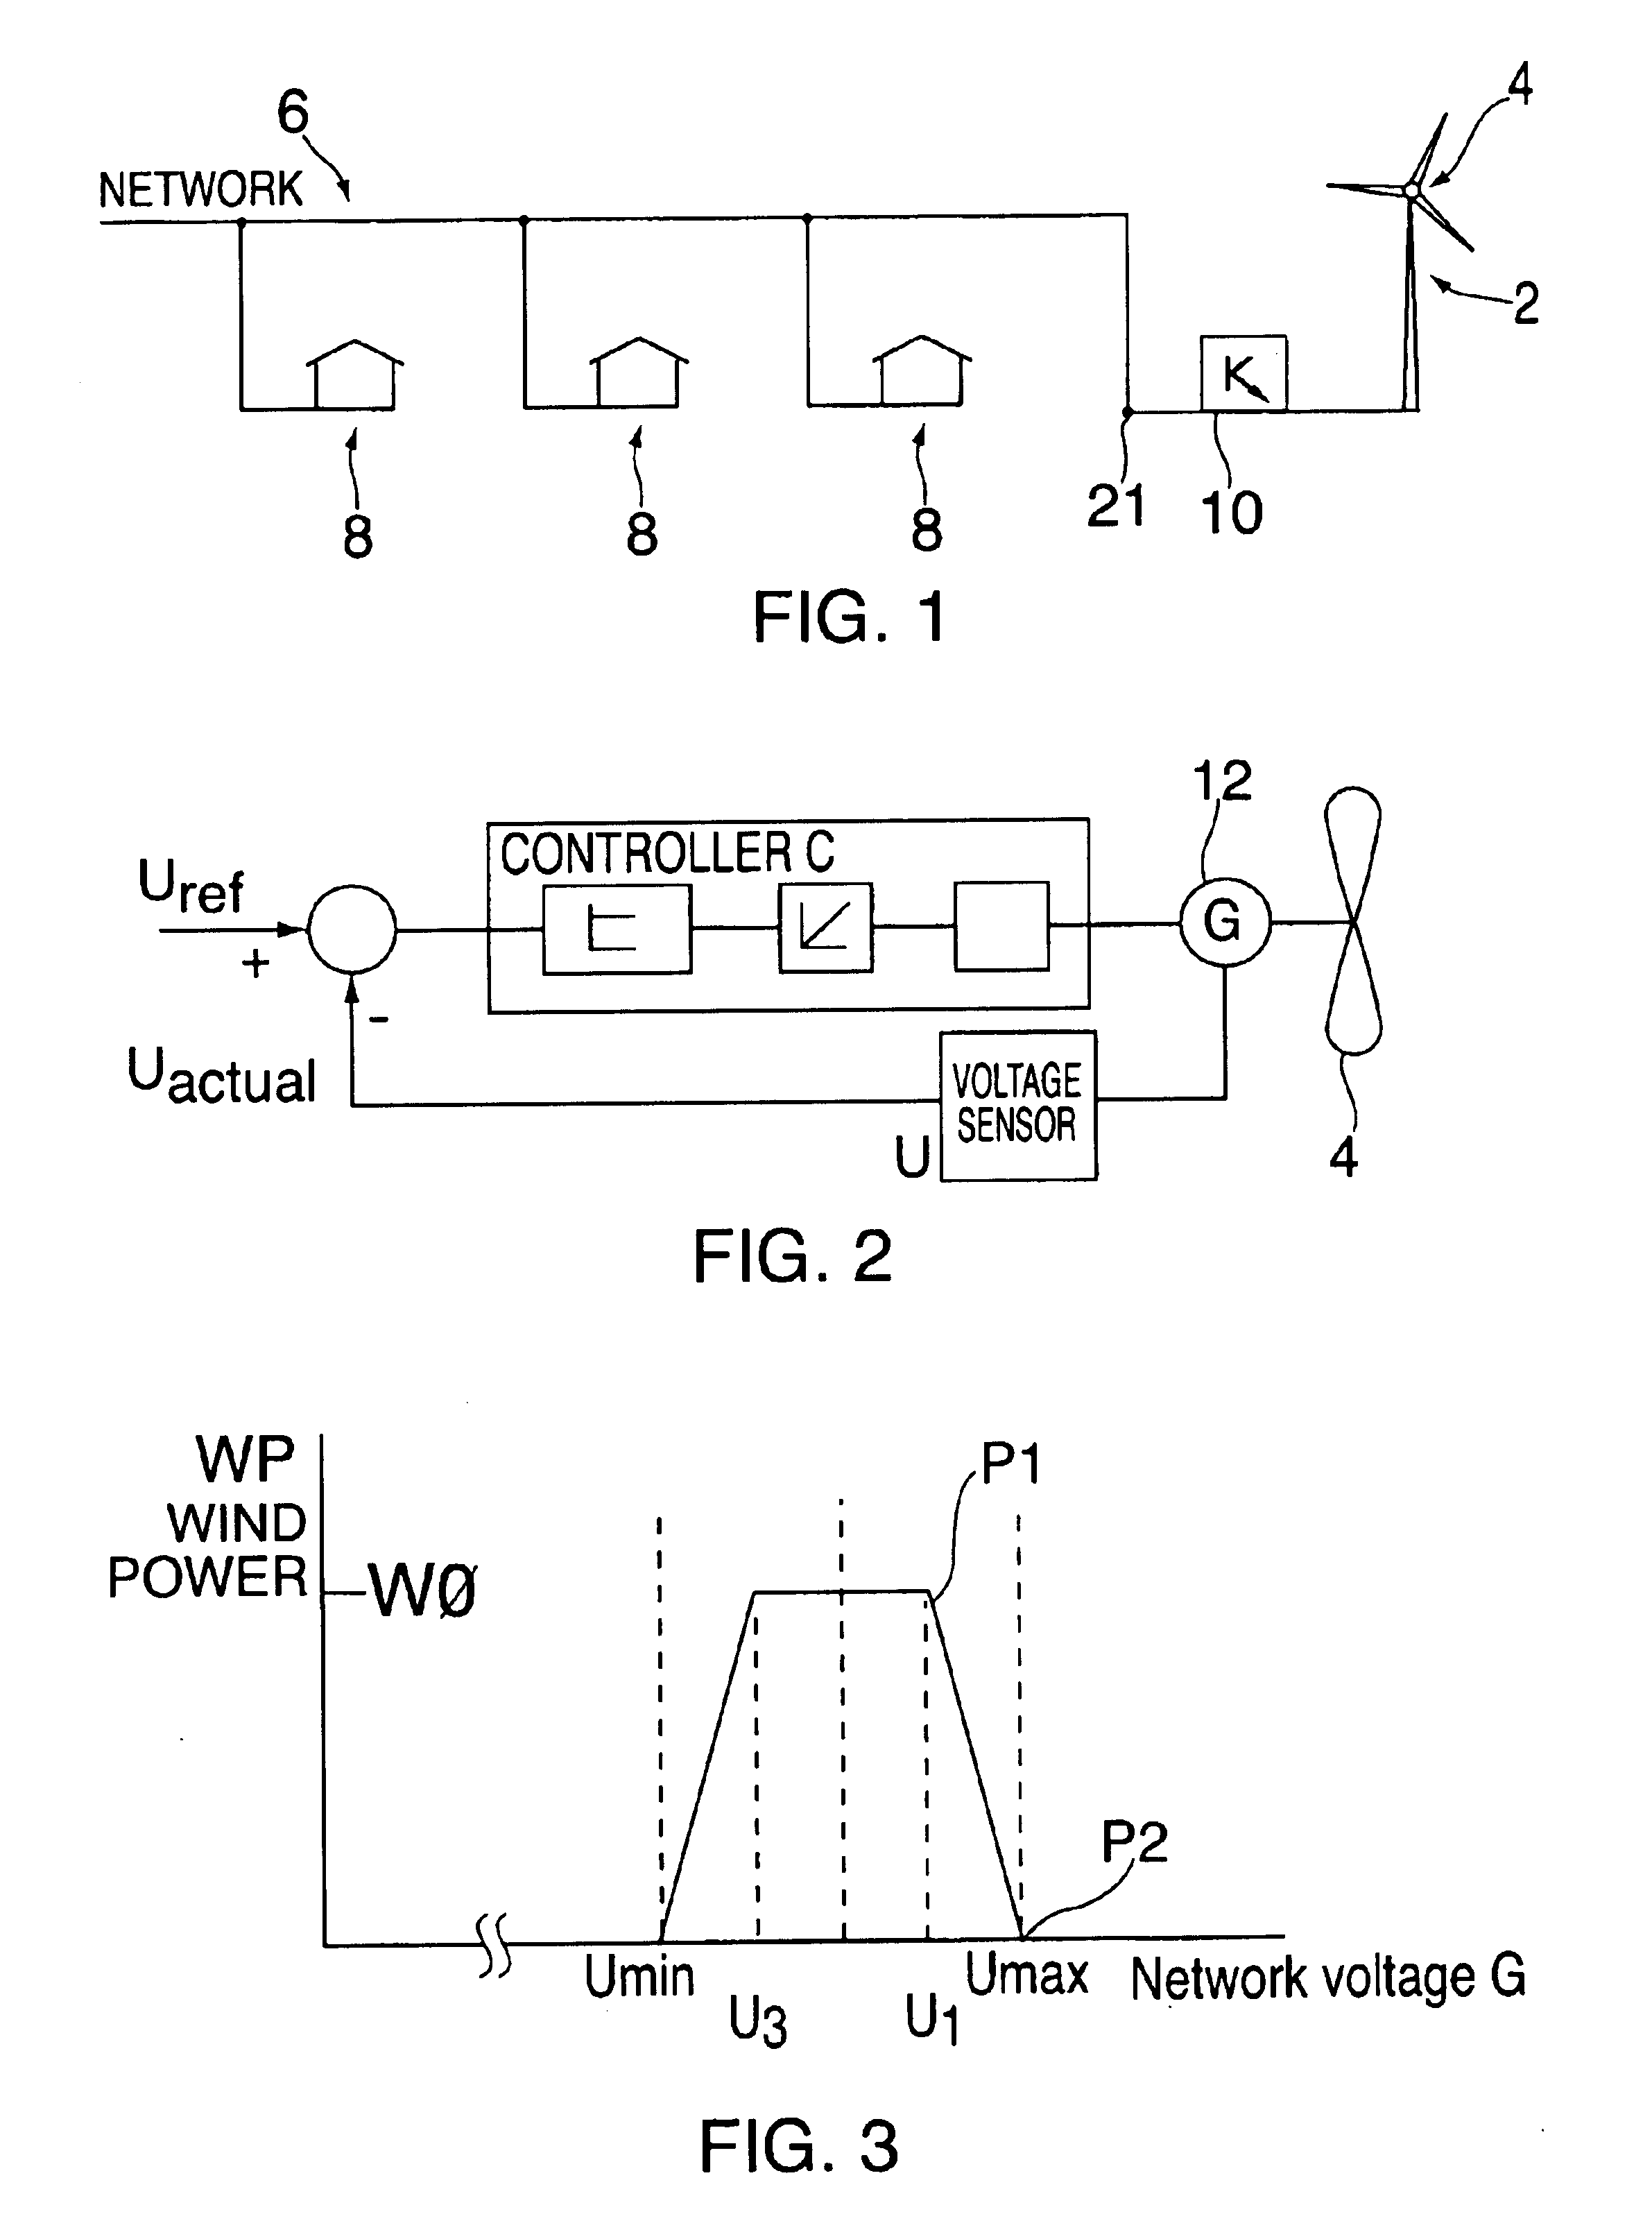 Method of operating a wind power installation and a wind power installation